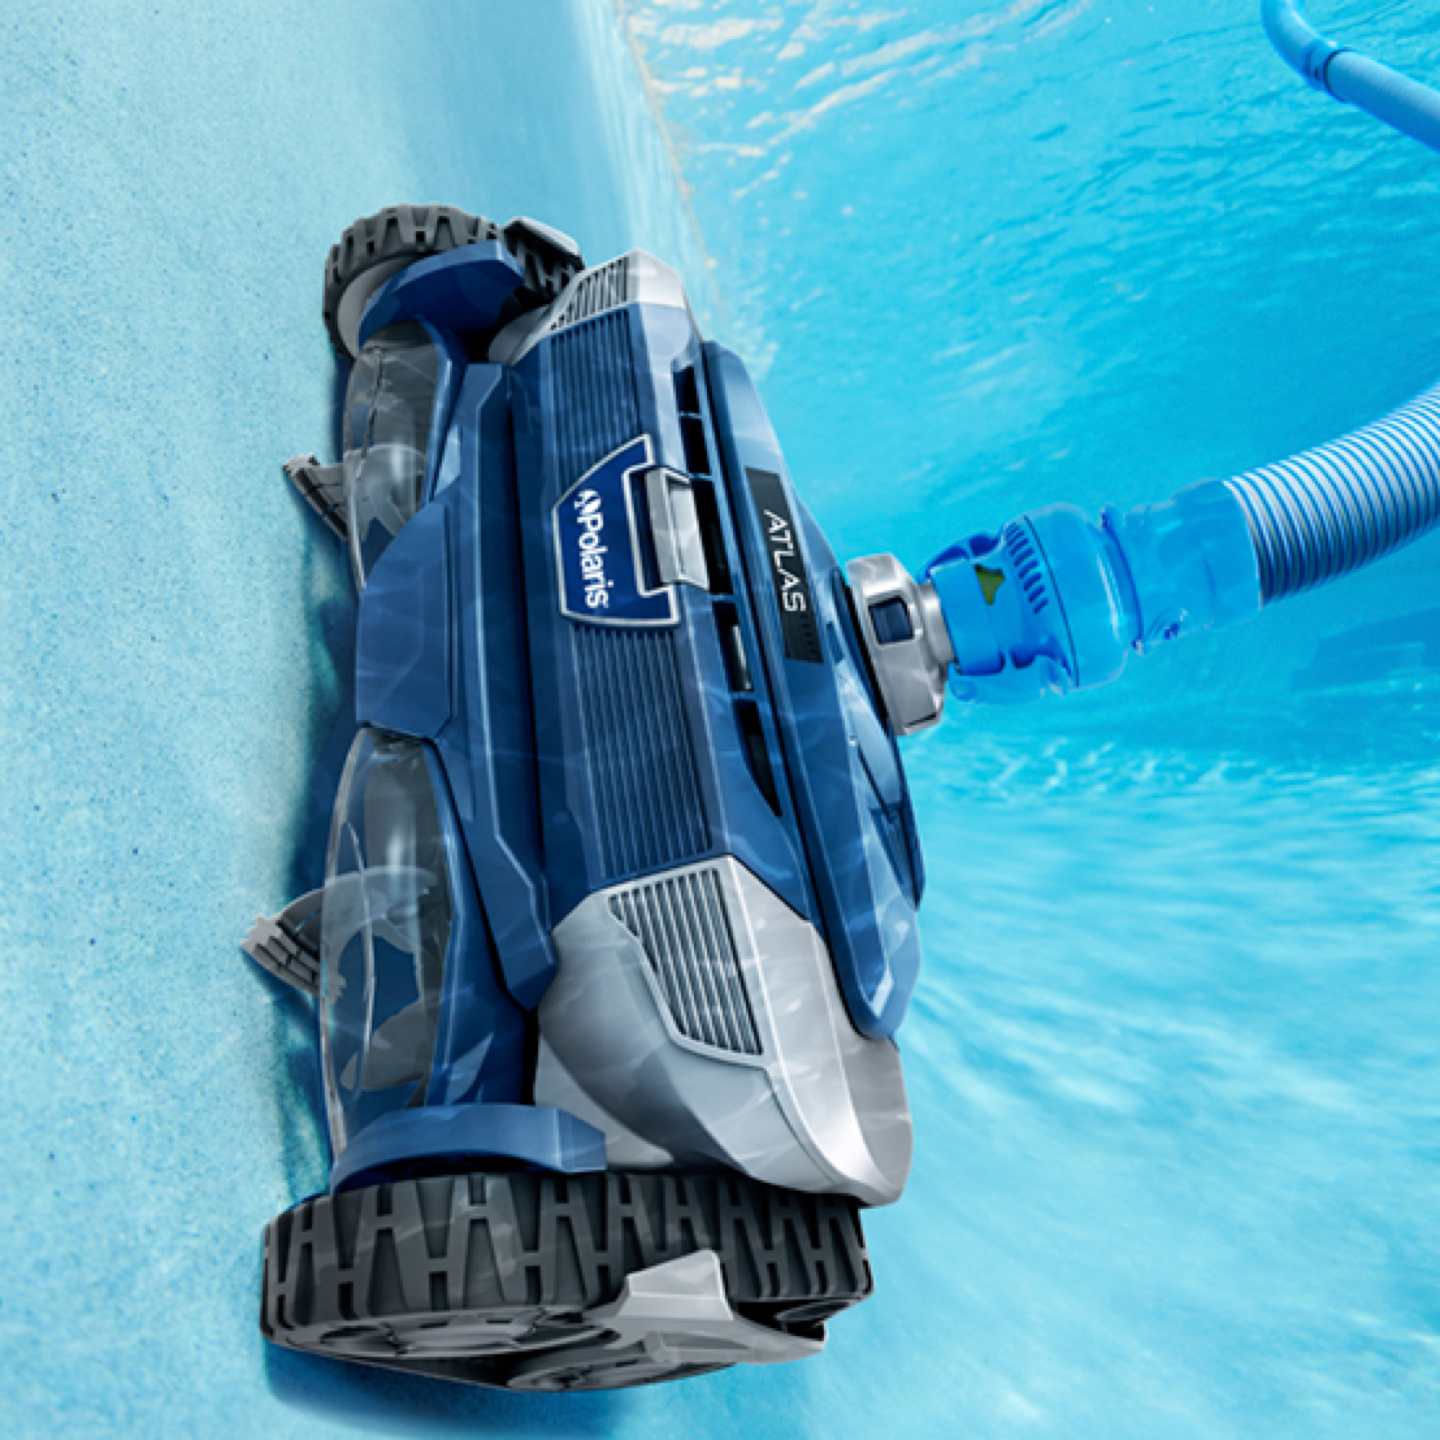 Suction-Side Pool Cleaner pool vacuum Climbing and Cleaning Wall